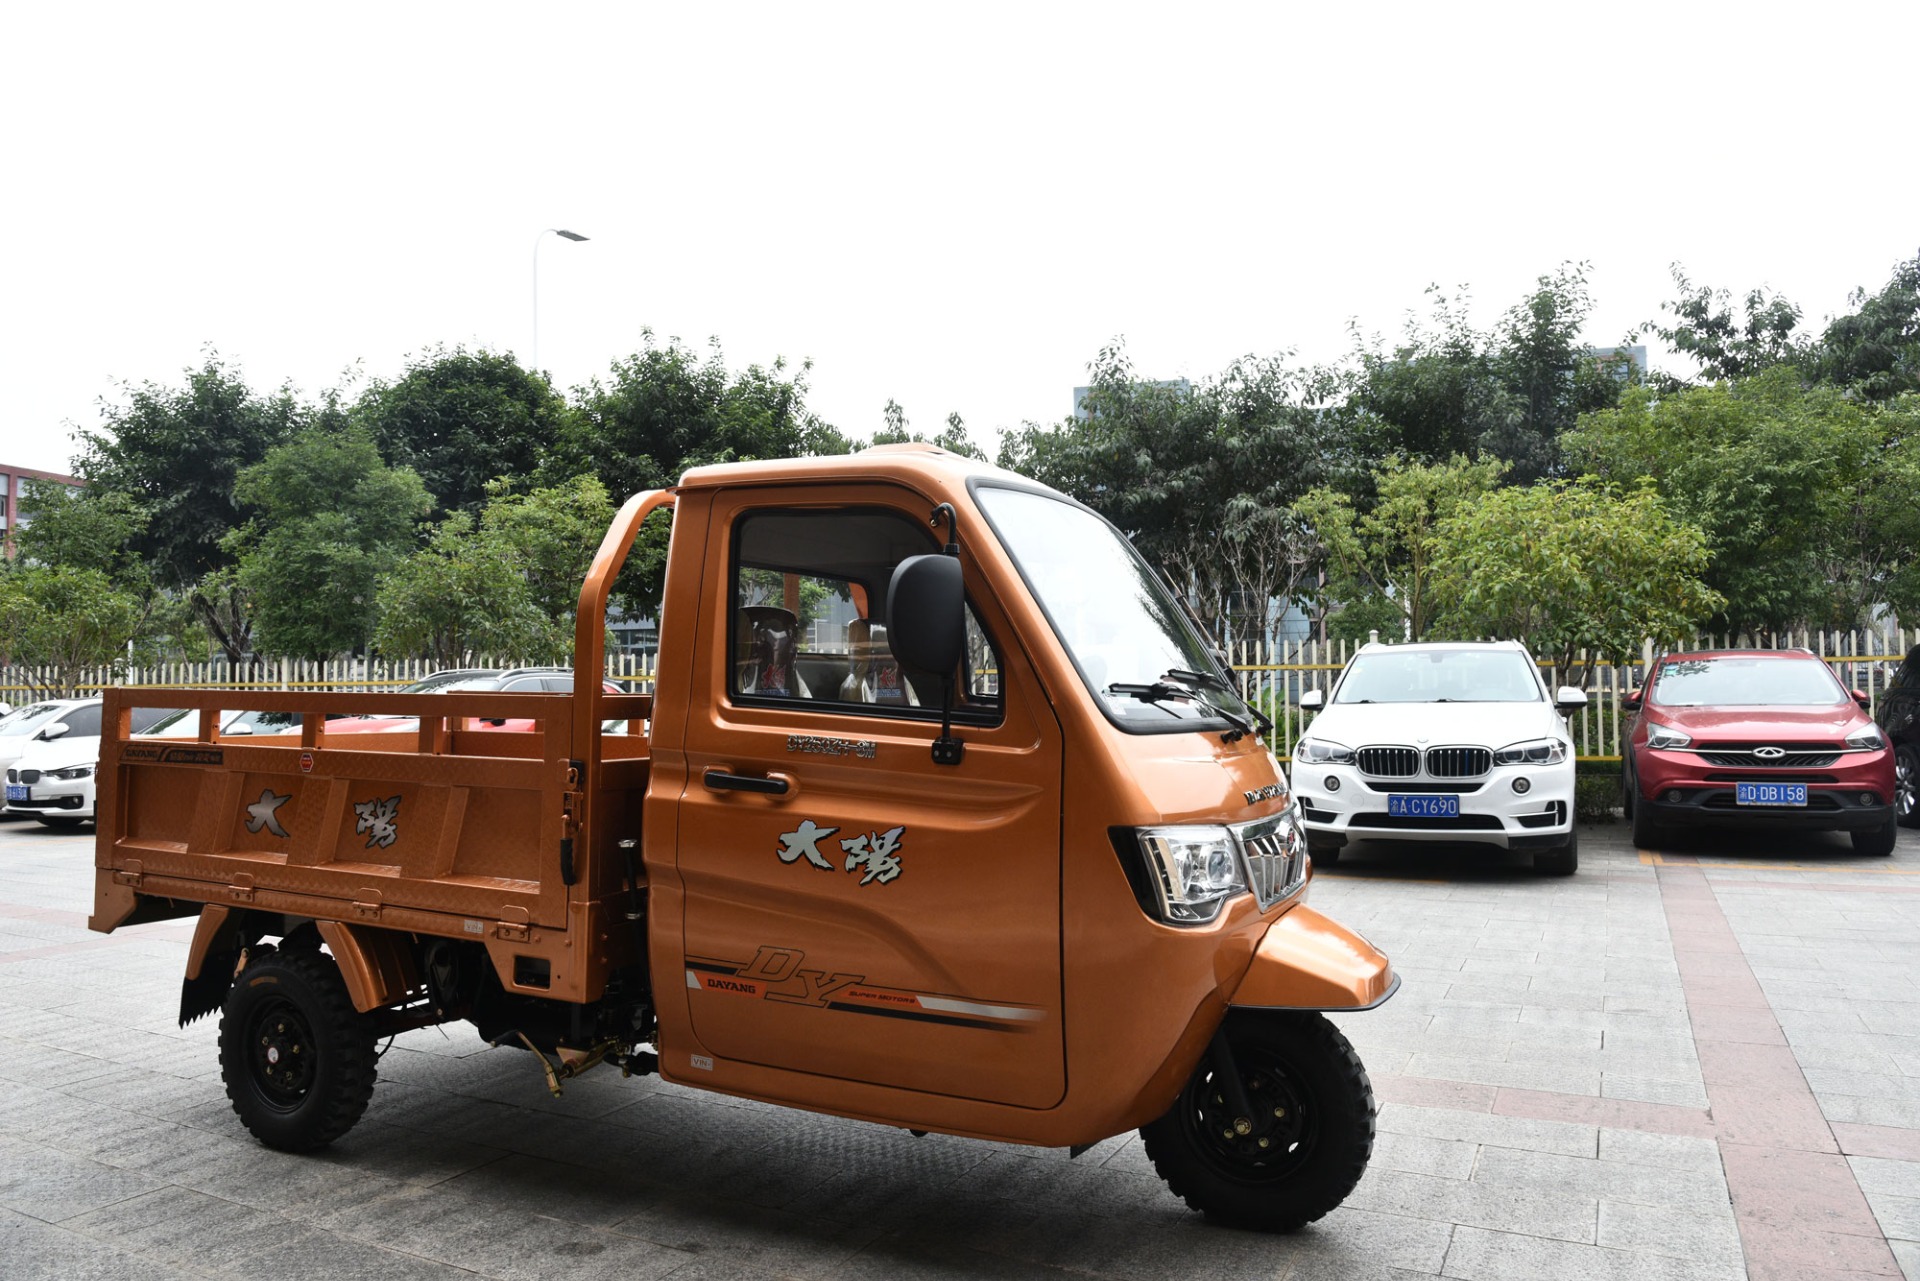 New design Reversible convenient lifan 200cc engine motocarro delivery van closed cabin cargo tricycle